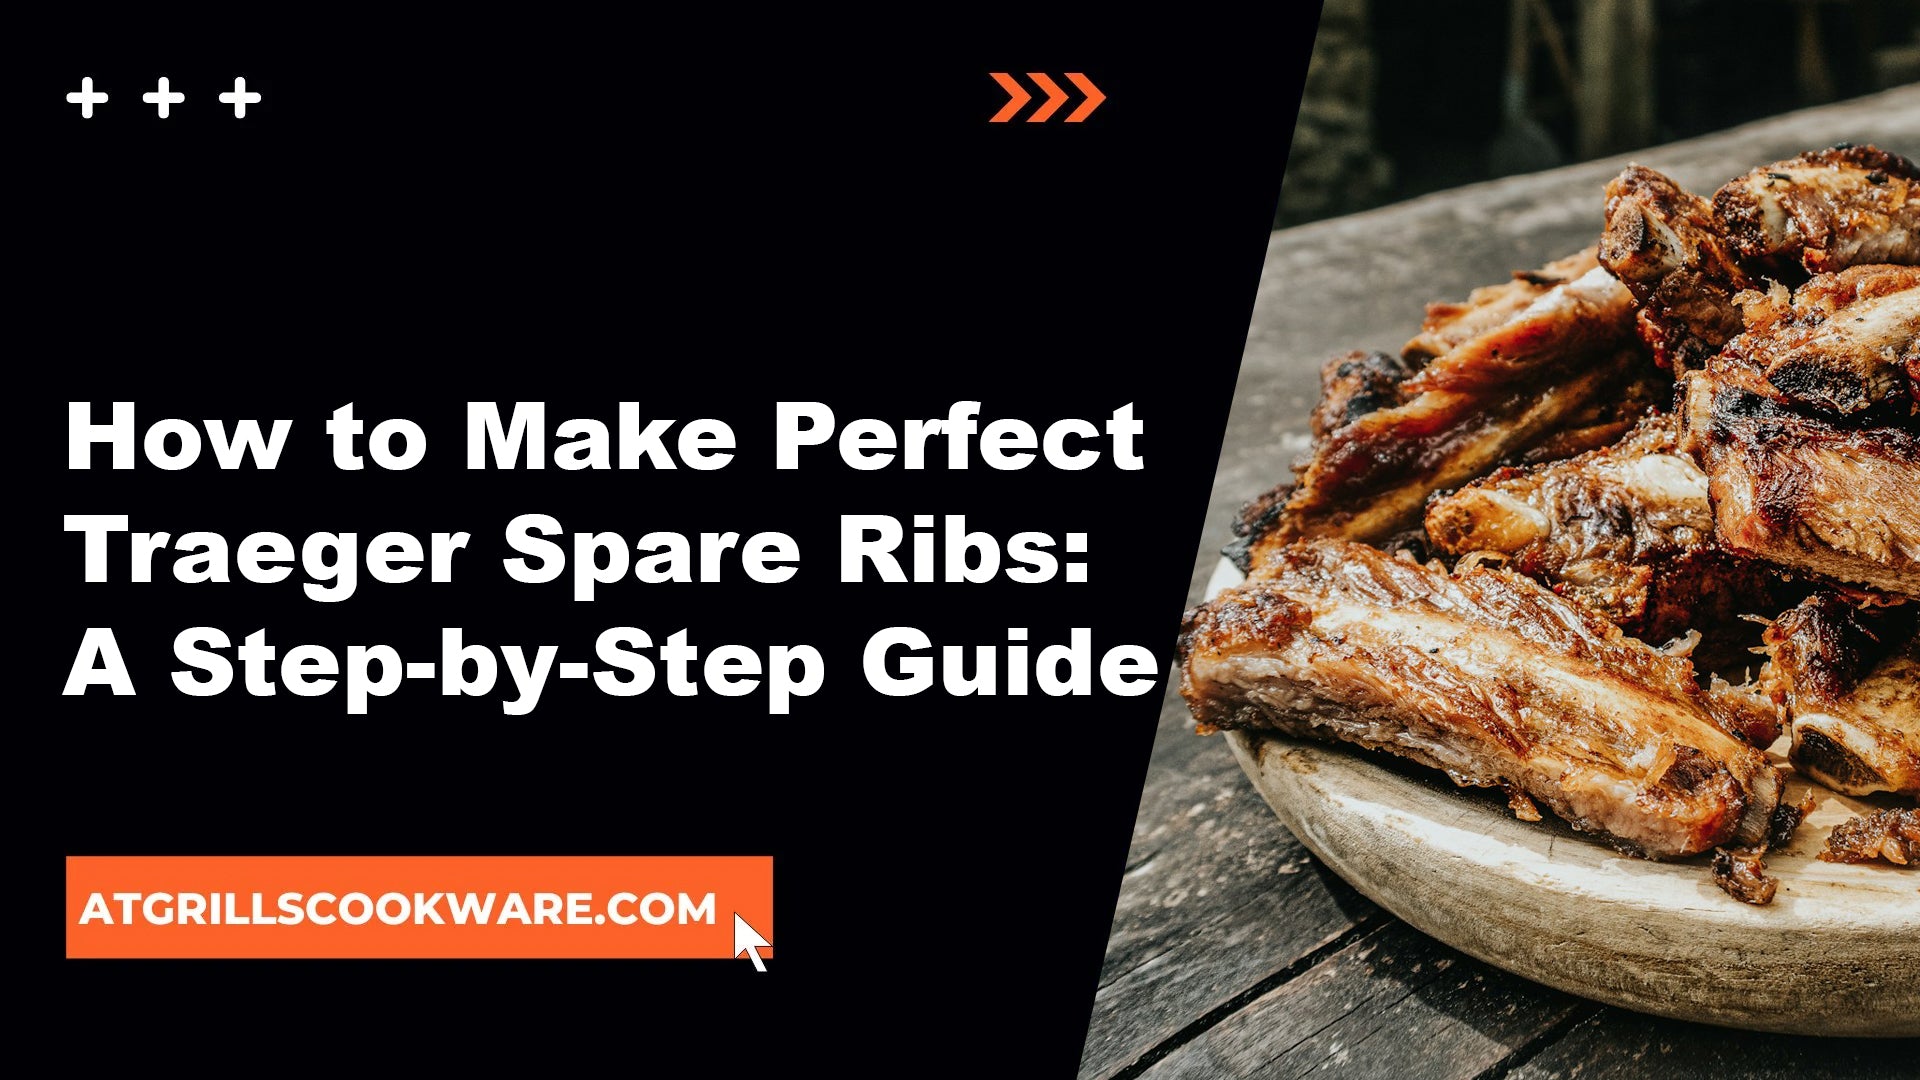 How to Make Perfect Traeger Spare Ribs: A Step-by-Step Guide